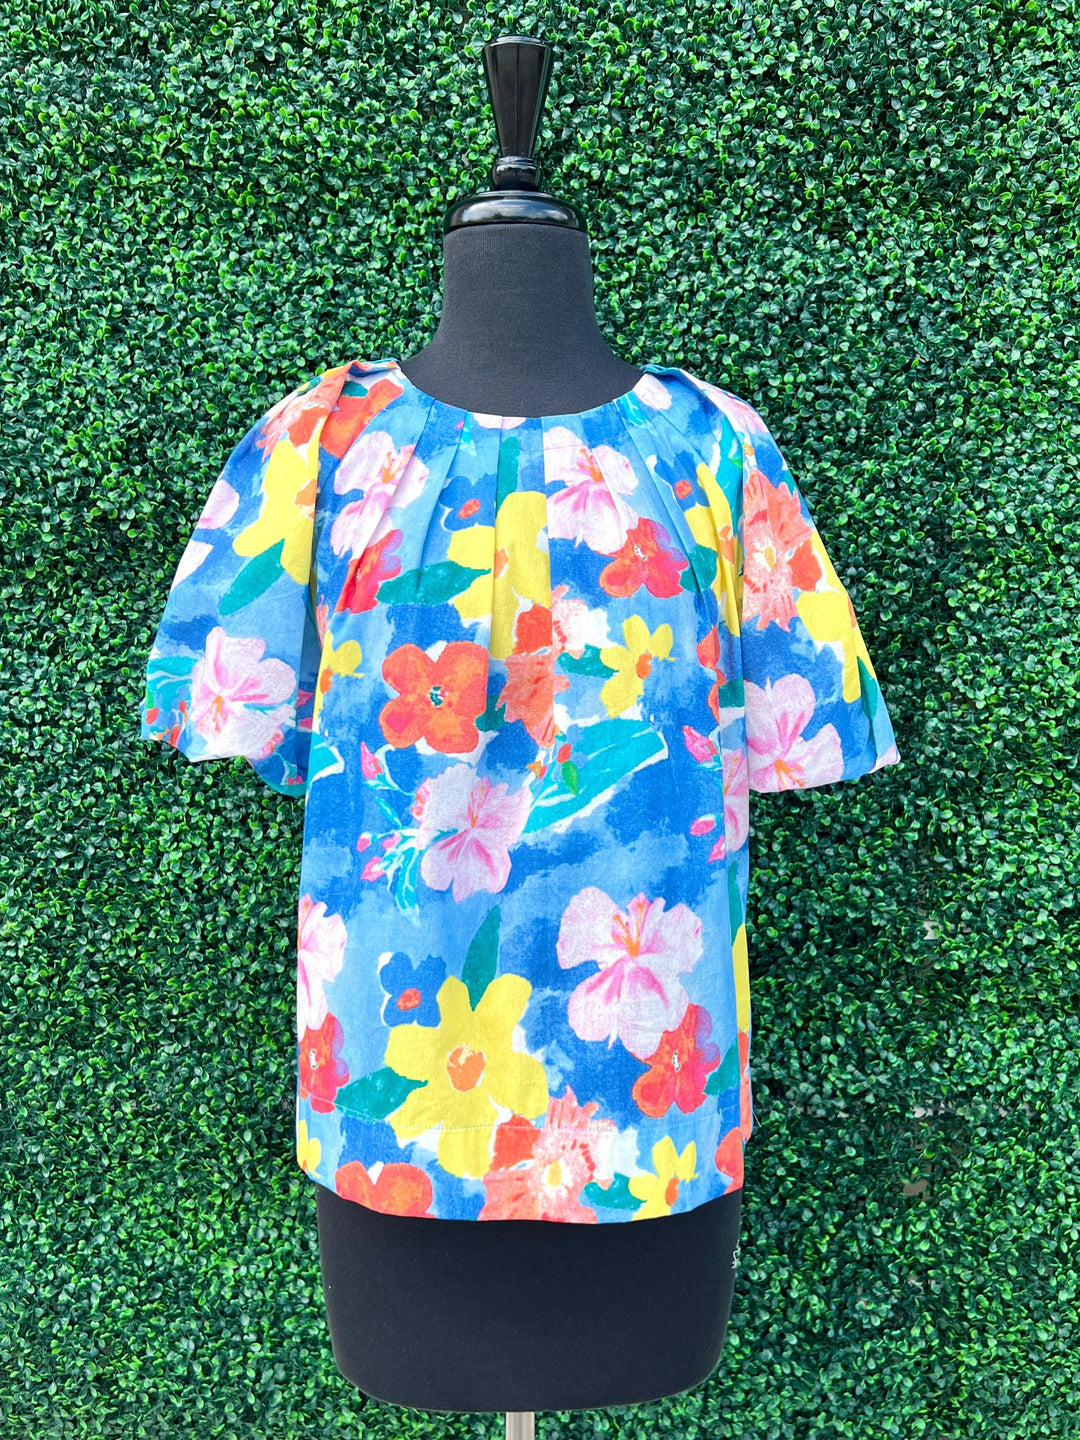 100% cotton jade melody tam puff sleeve top boutique floral blue yellow pink